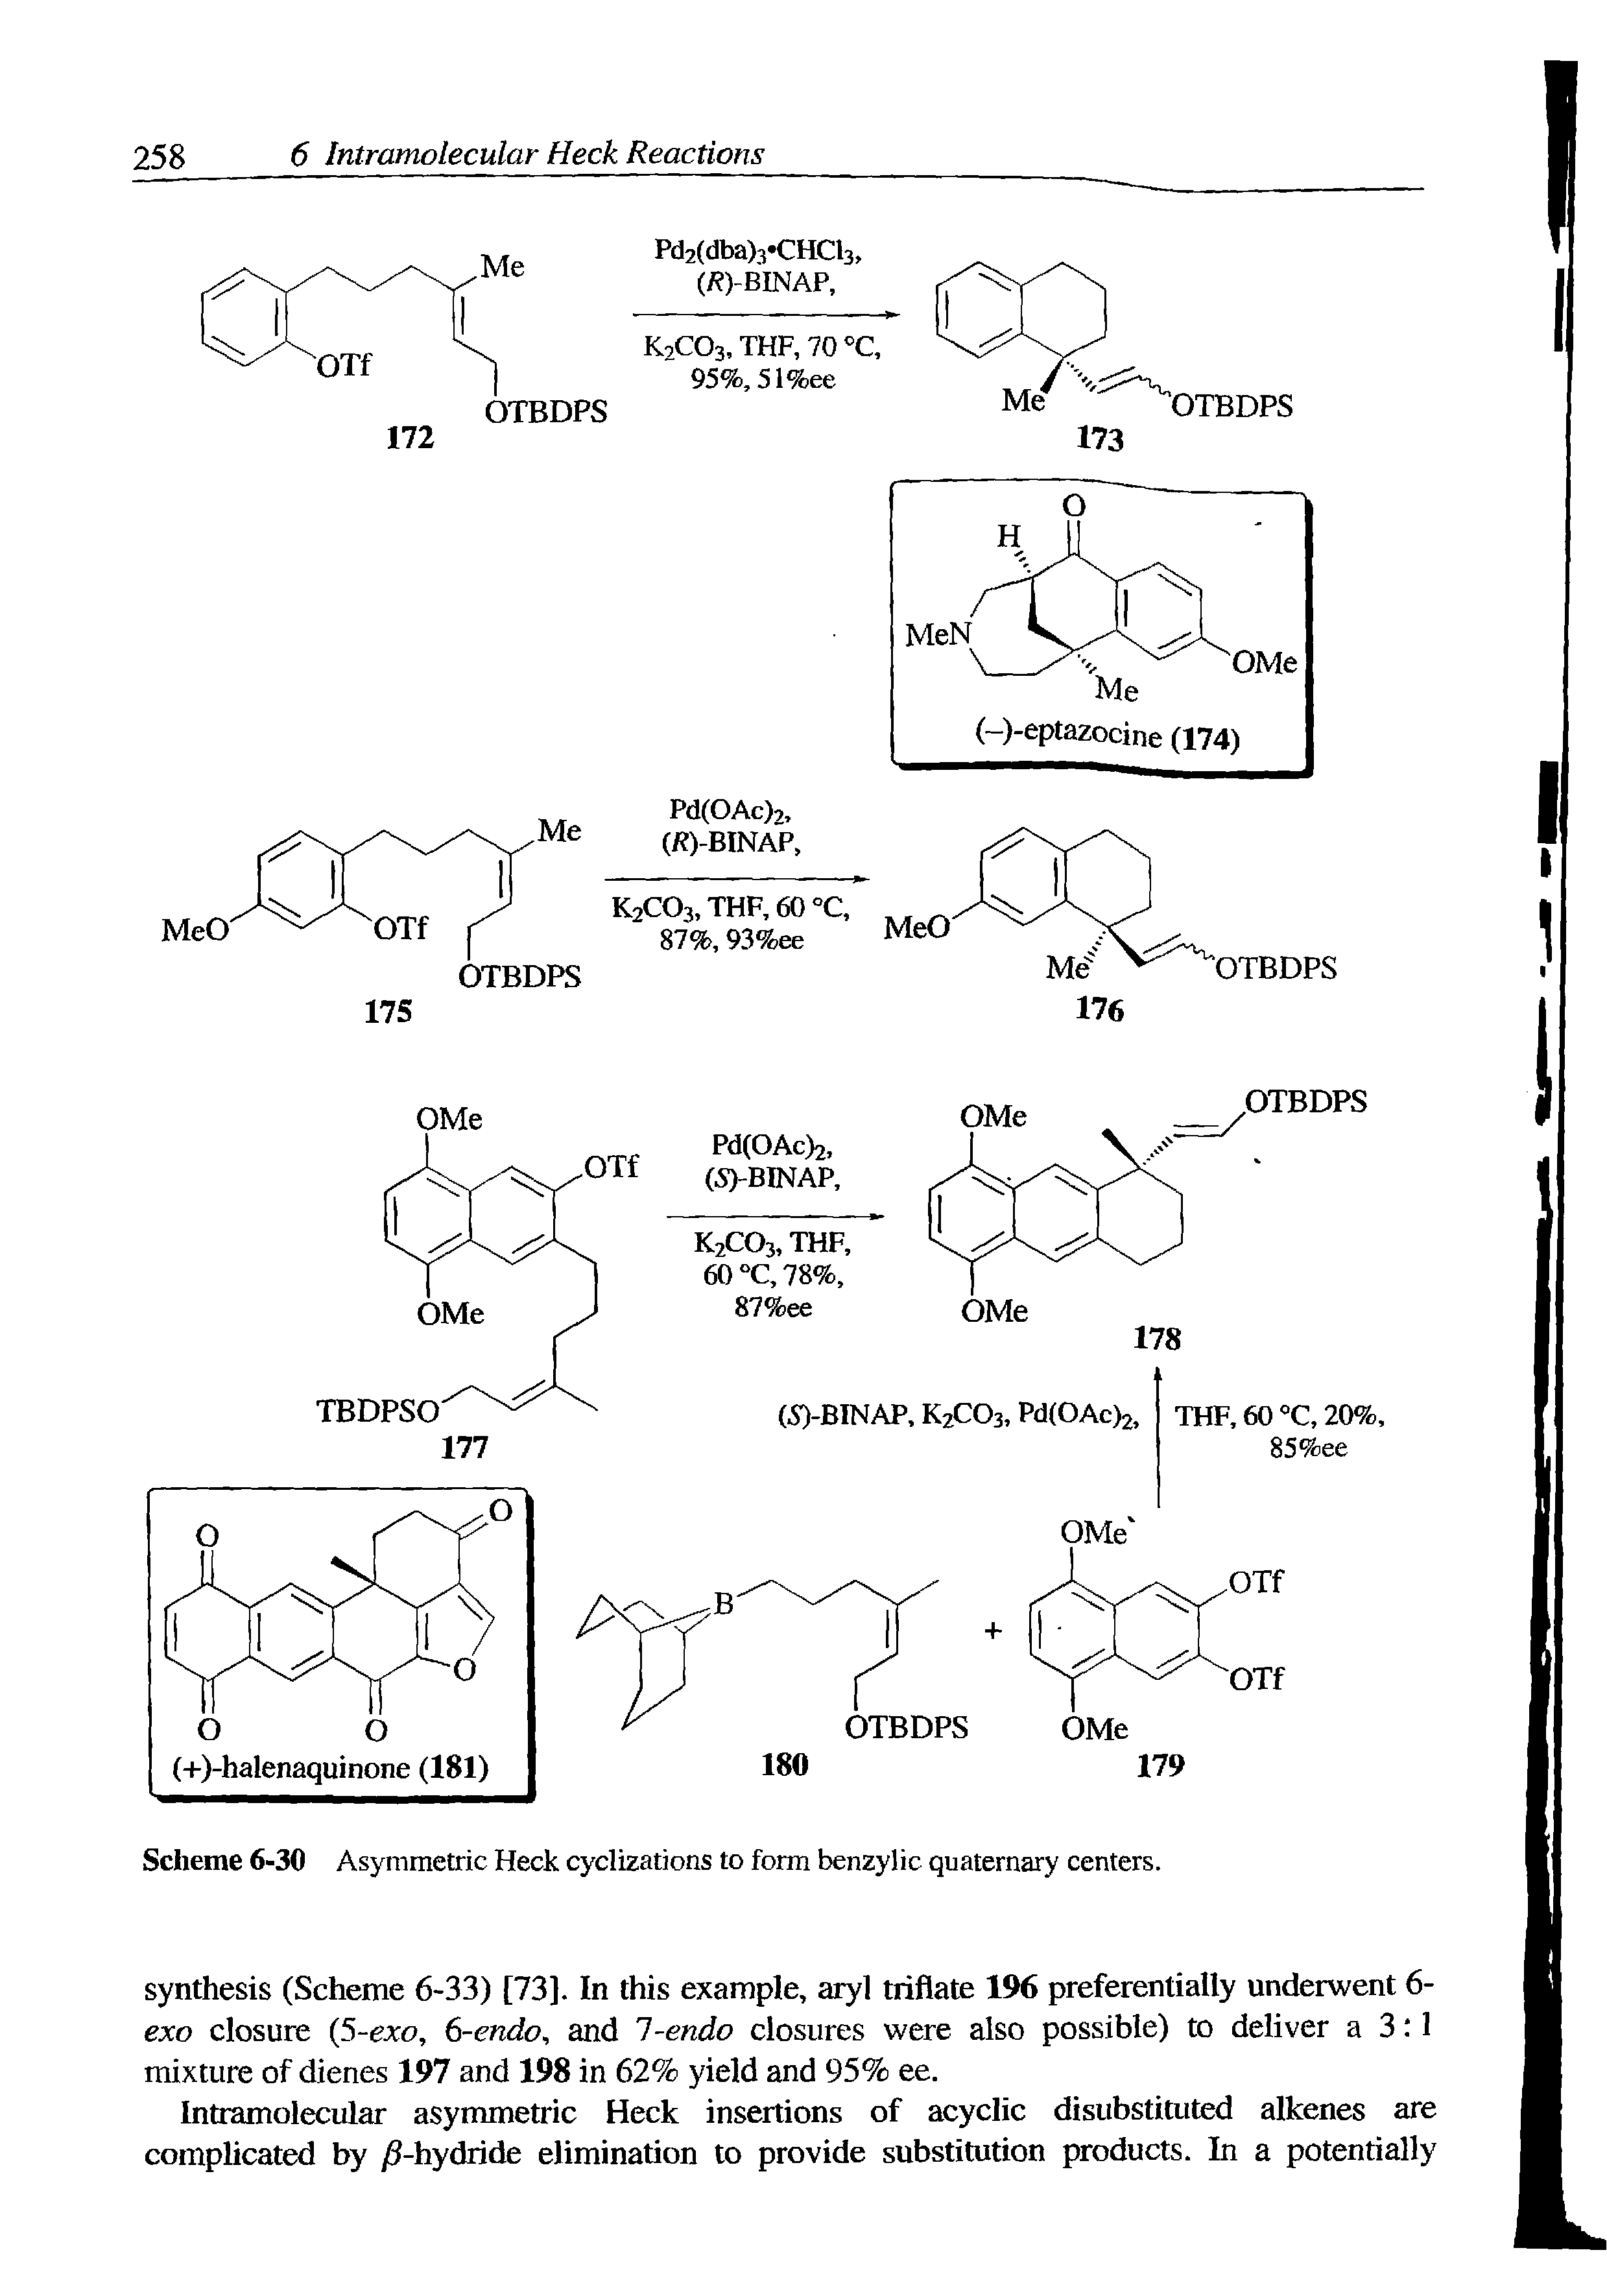 Scheme 6-30 Asymmetric Heck cyclizations to form benzylic quaternary centers.